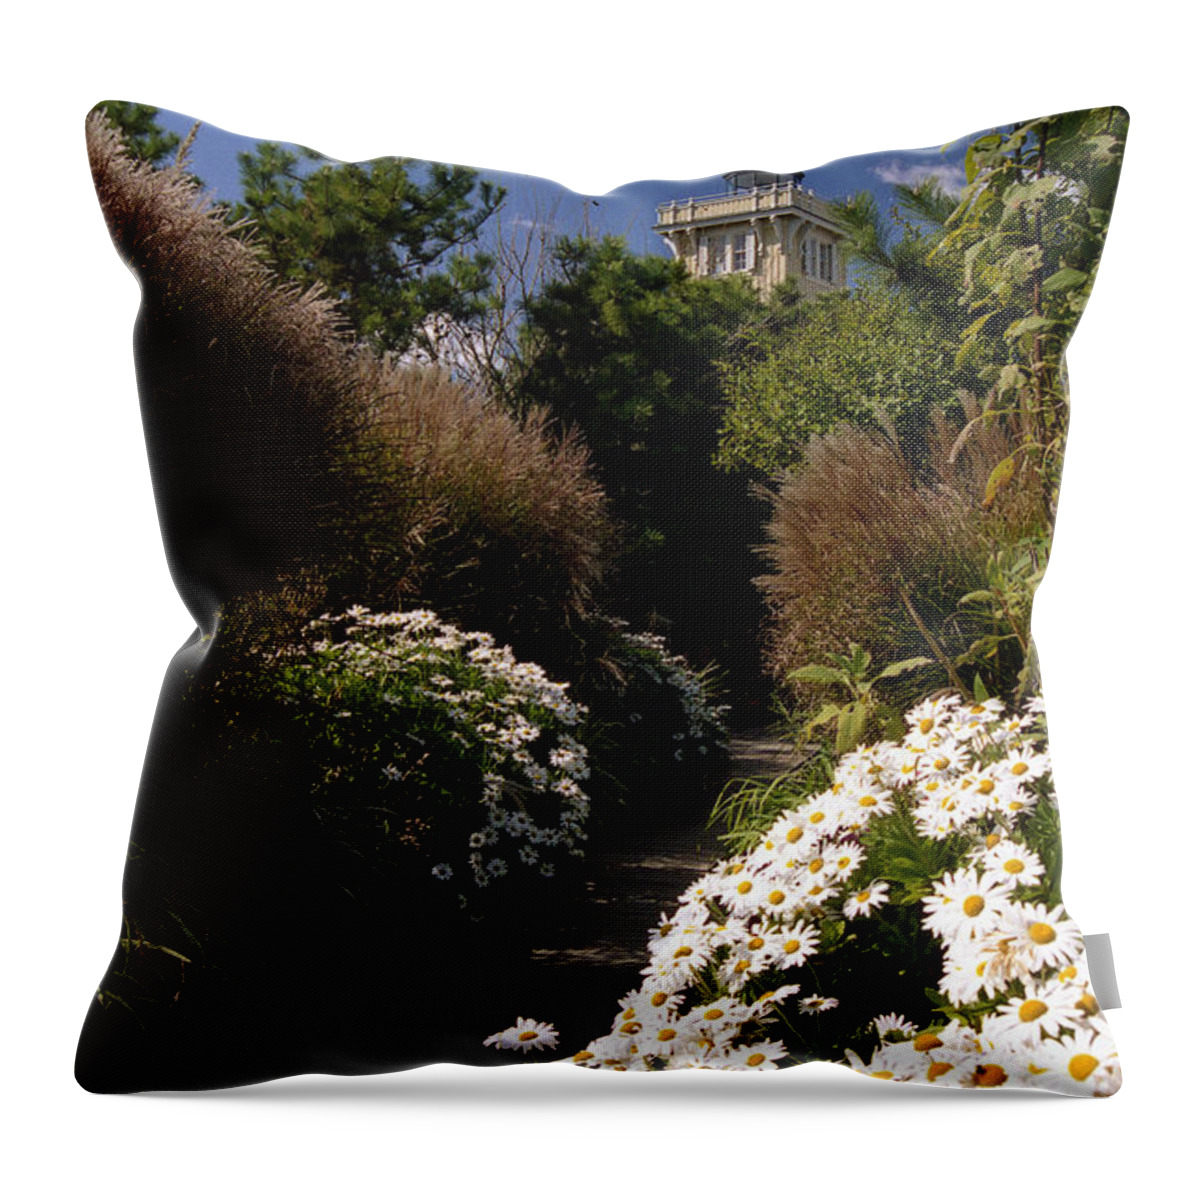 Gardens Throw Pillow featuring the photograph The Gardens At Hereford by Skip Willits